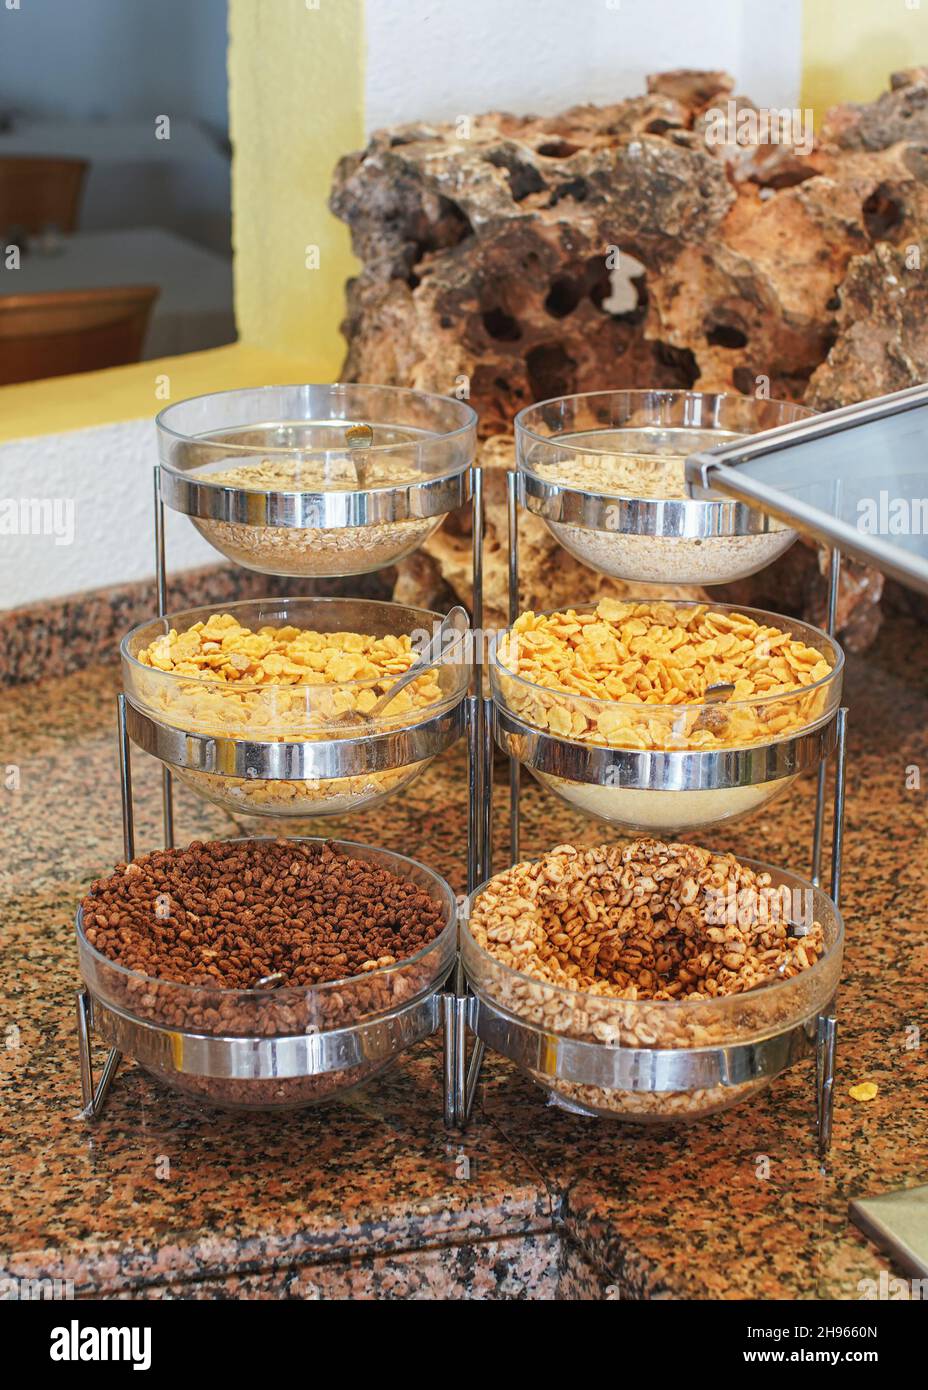 Corn, cereals and rice flakes in glass bowls displayed at restaurant breakfast buffet table Stock Photo